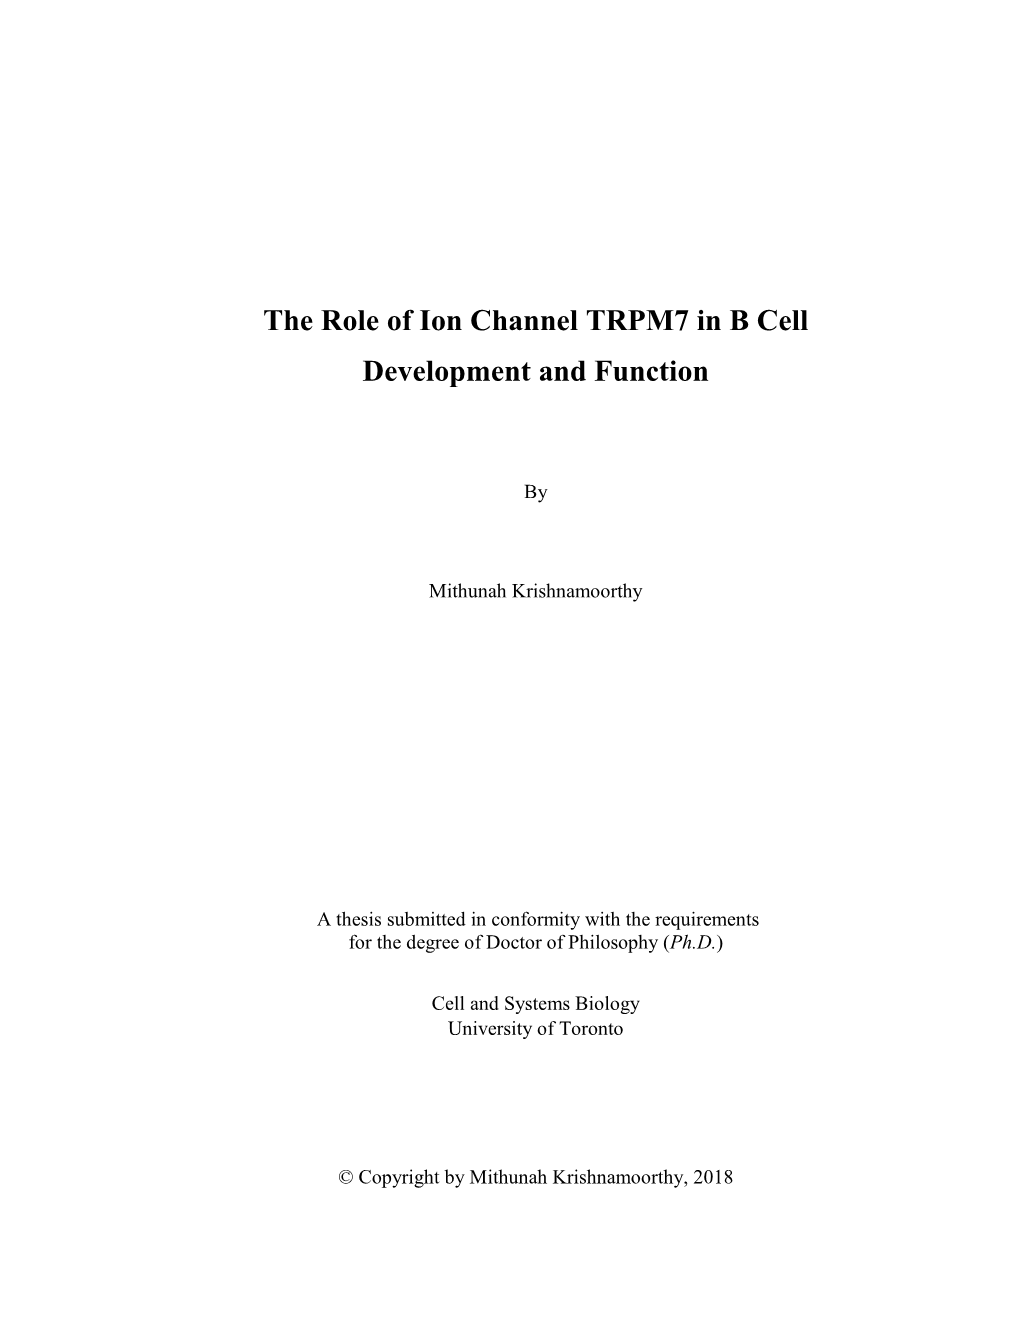 The Role of Ion Channel TRPM7 in B Cell Development and Function